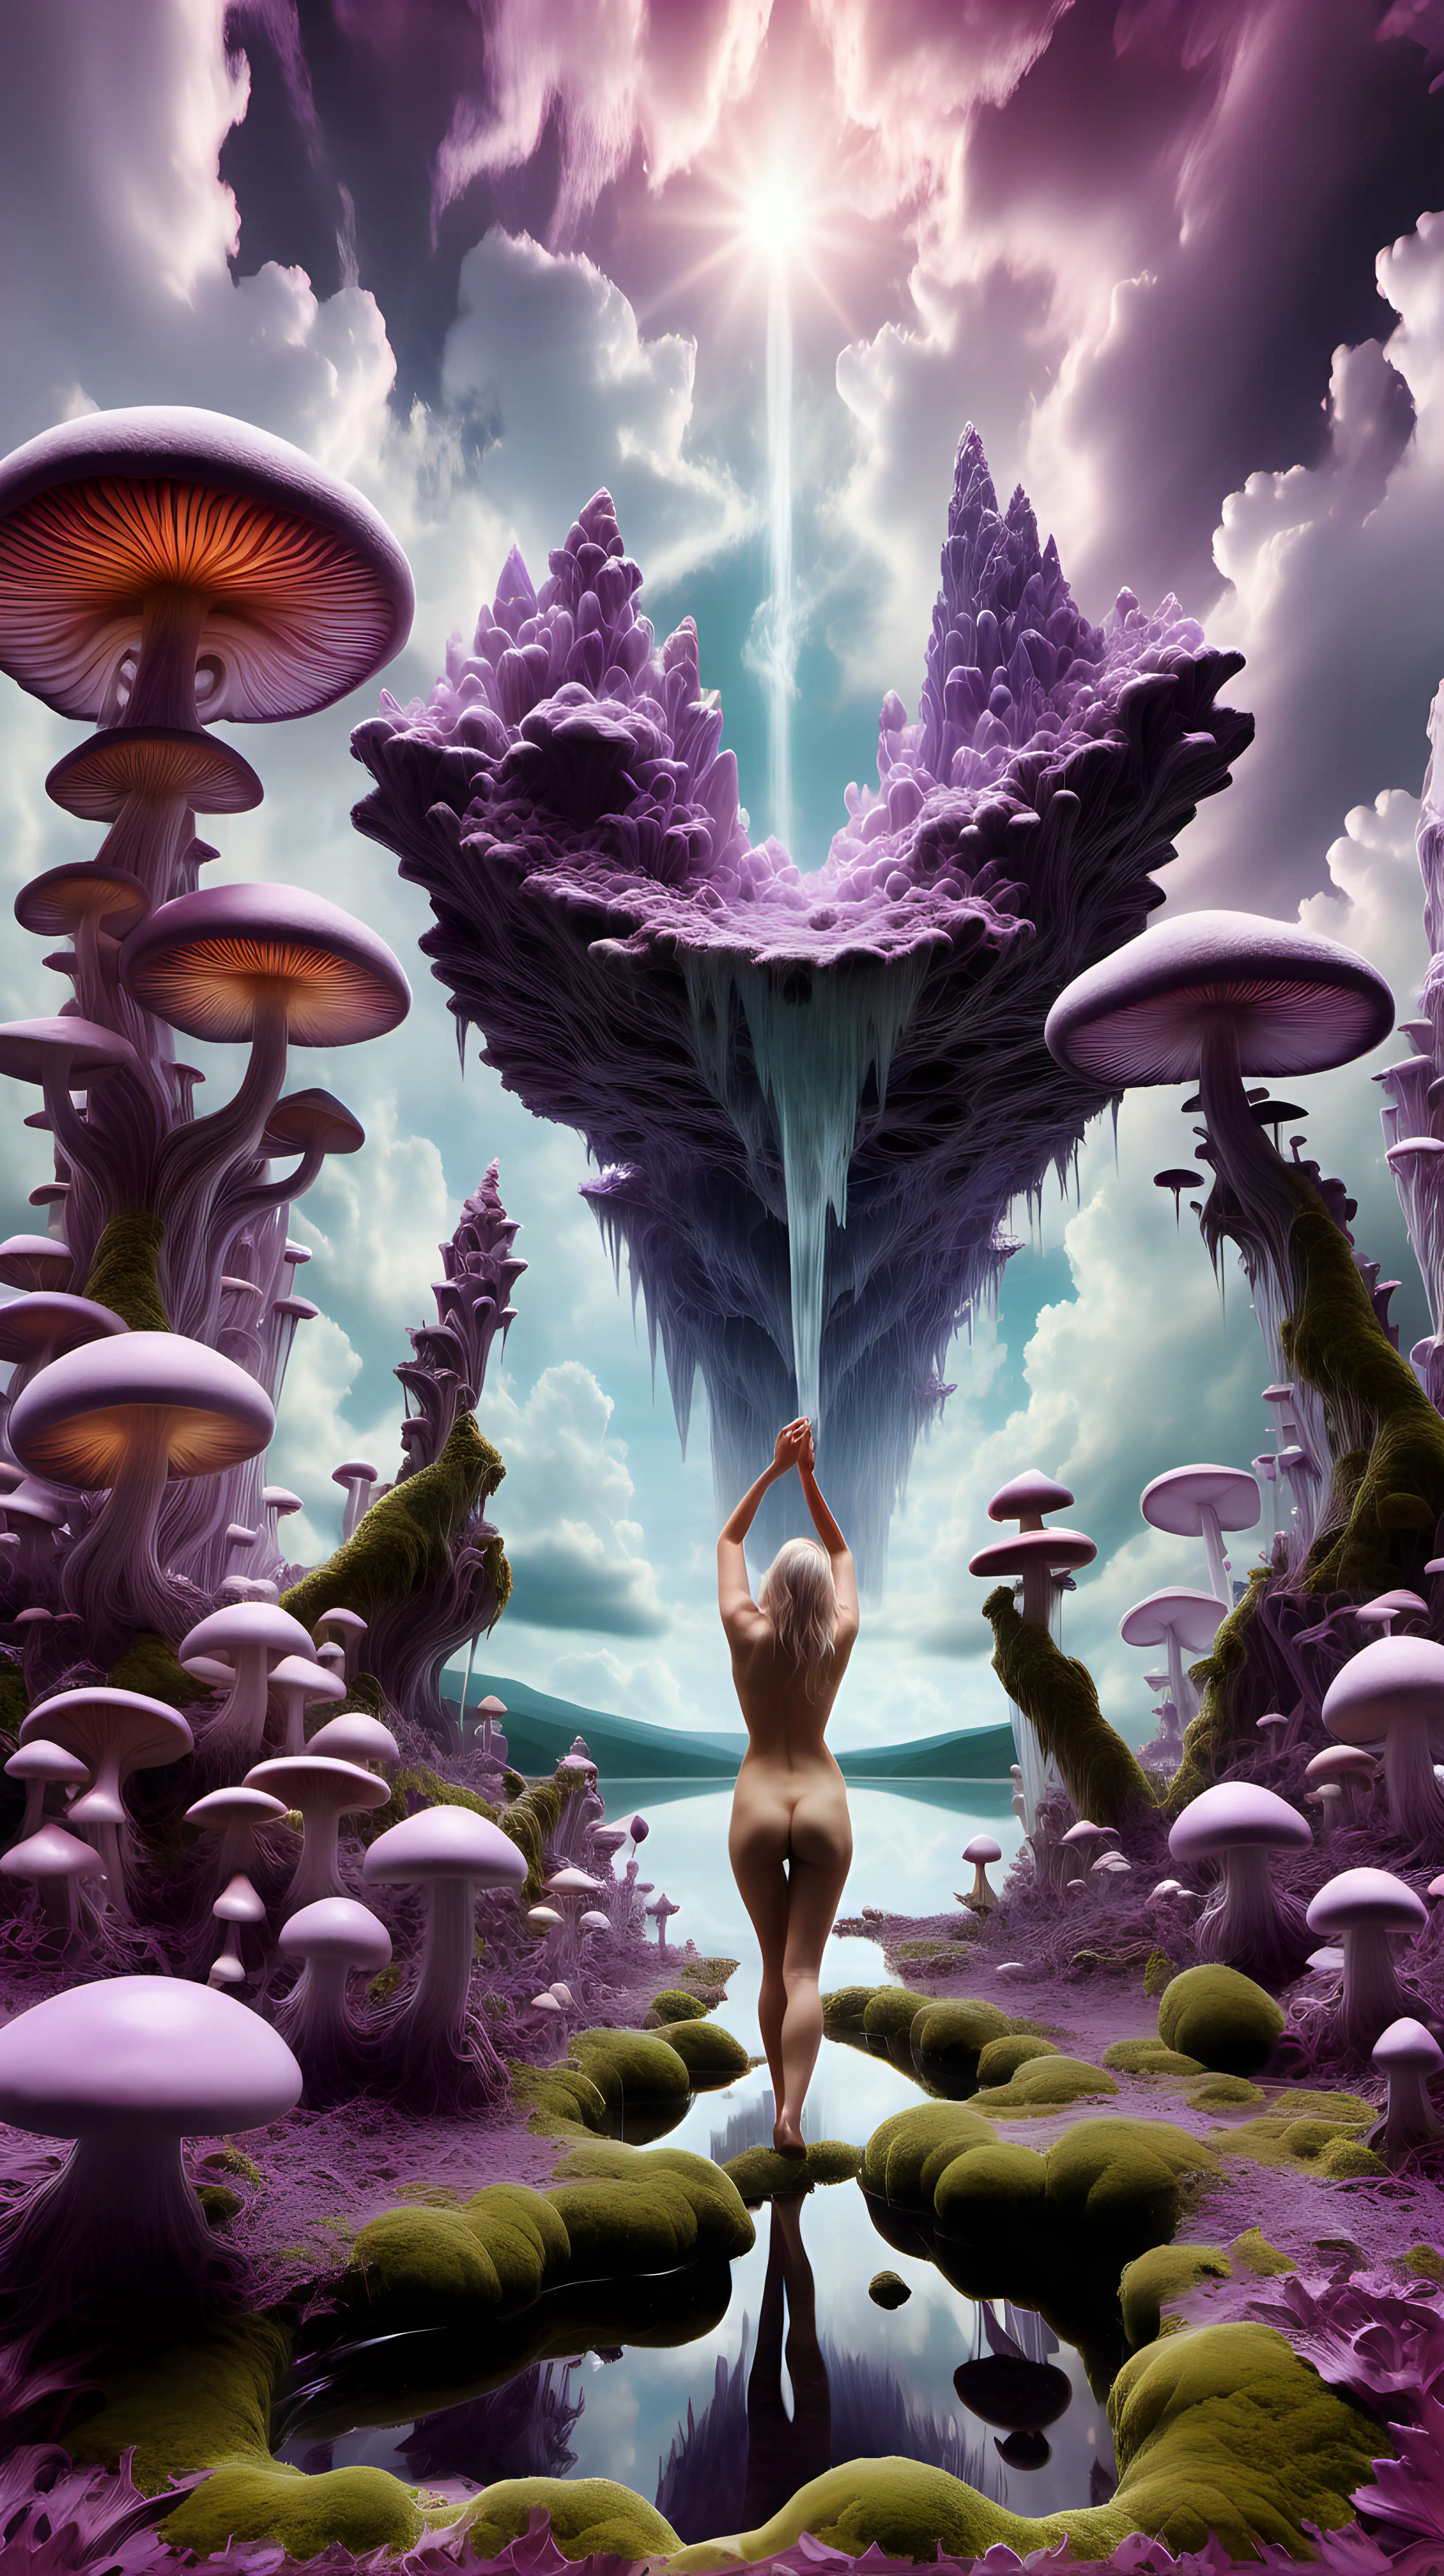 Enchanting Psychedelic Landscape Ascending Nude Woman Amidst Crystalline Clouds